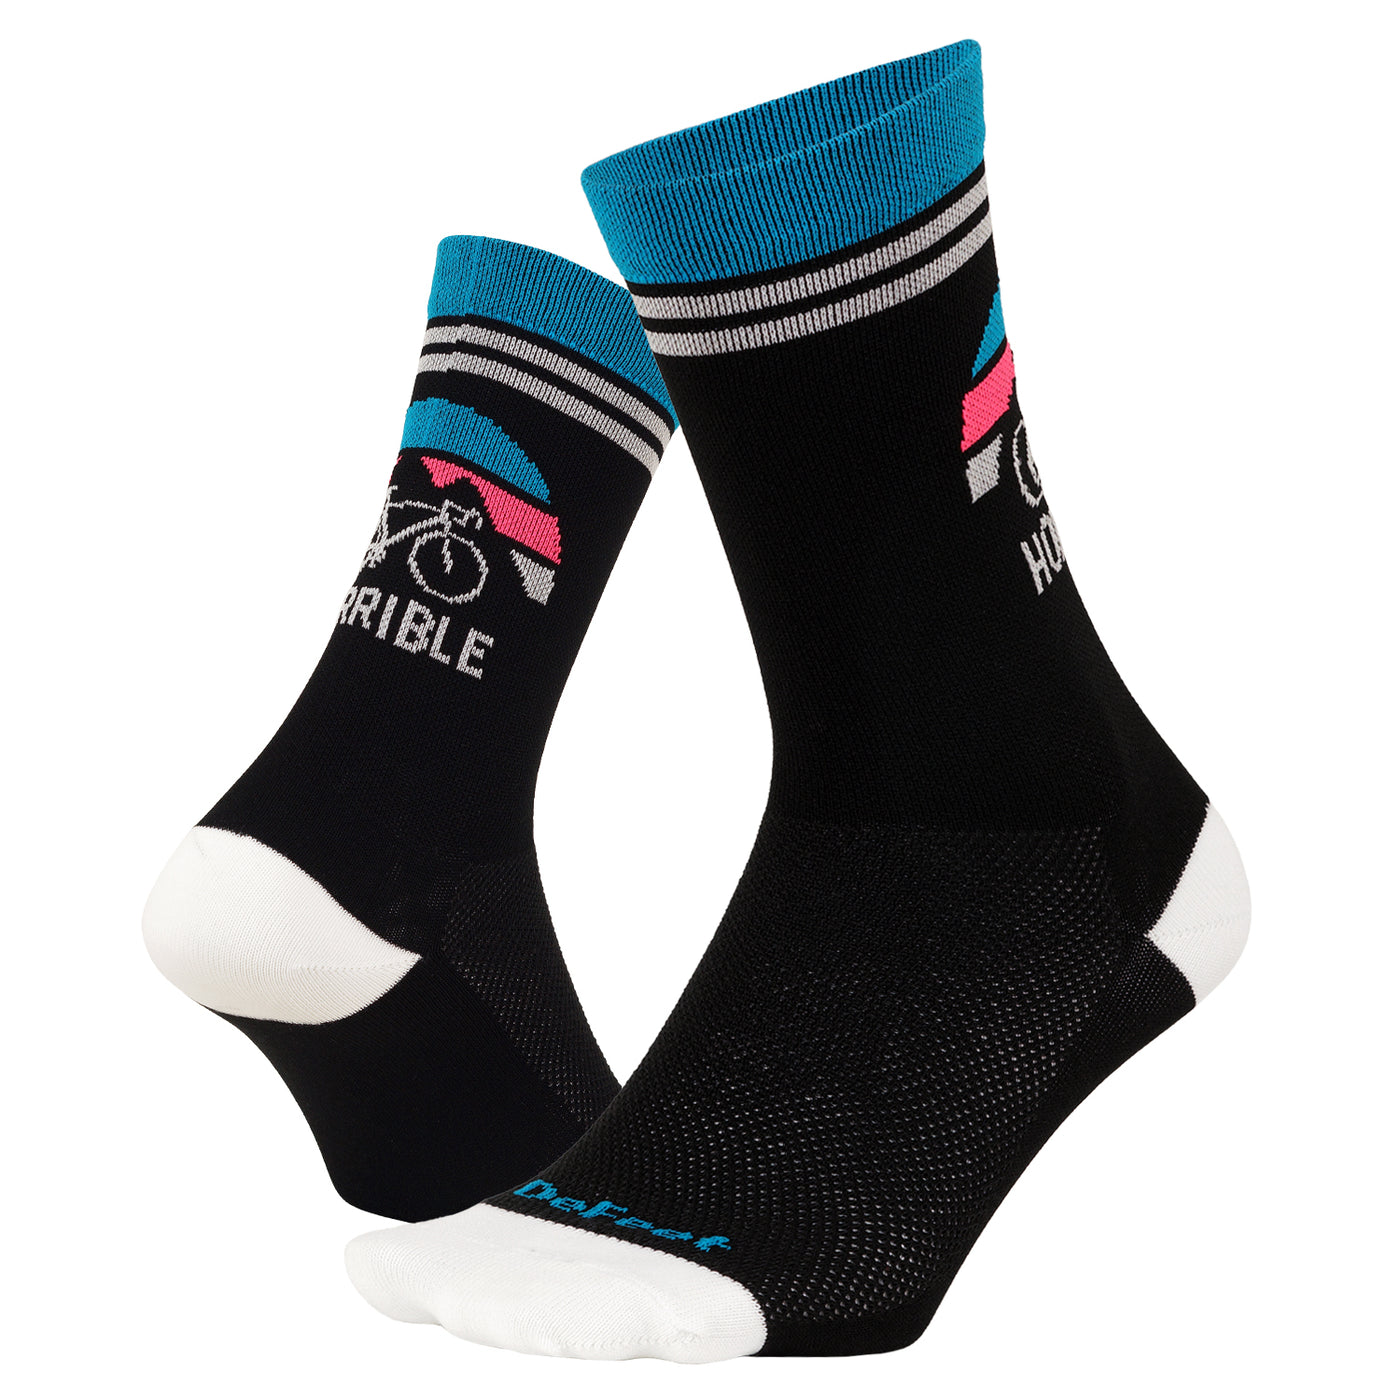 a pair of black Aireator custom event cycling socks with the Horrible Hundred logo on the back